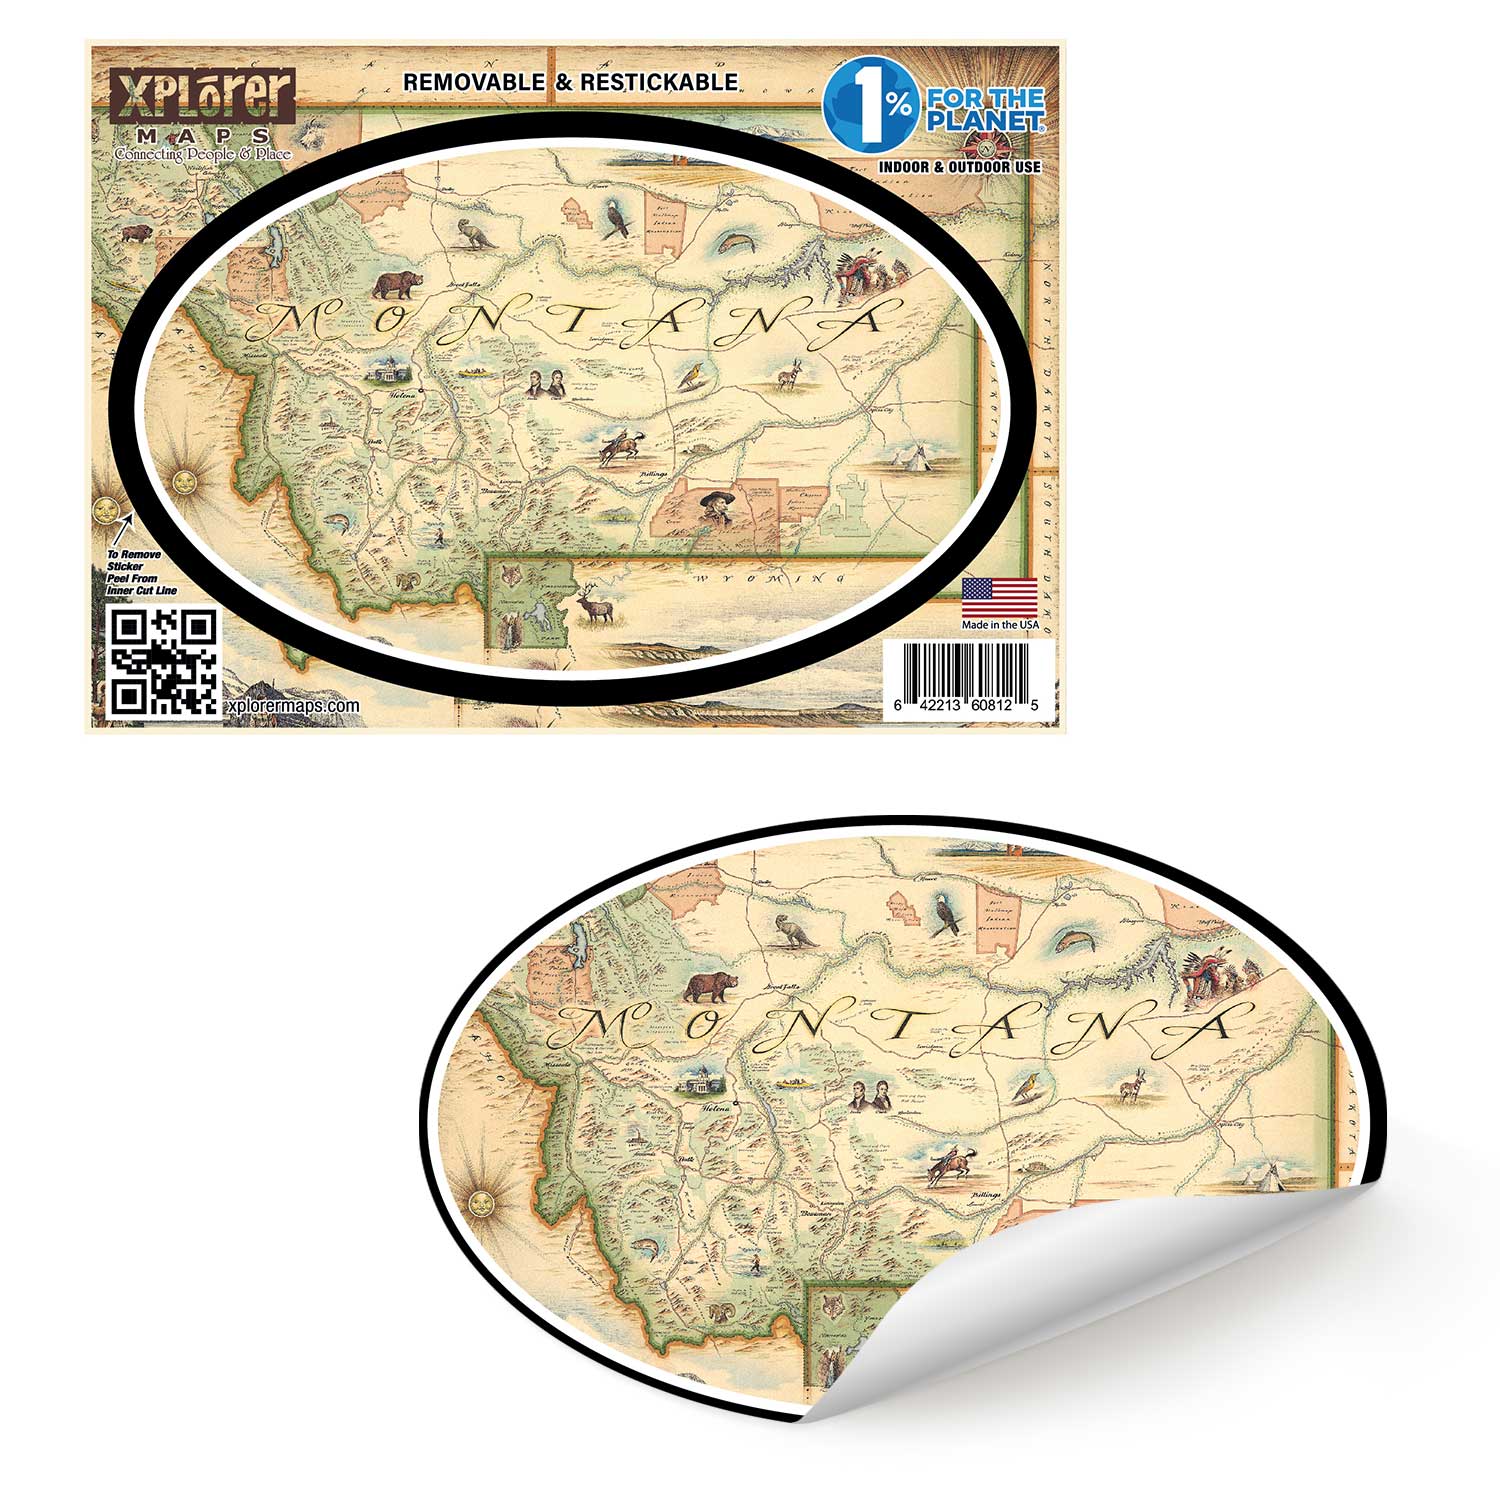 Montana State Map Stickers by Xplorer Maps. The map features Sacajawea, Lewis & Clark, Yellowstone, Glacier National Park, Flathead Lake, grizzly bear, bald eagle, and elk. Cities like Missoula, Bozeman, Helena, and Whitefish are included in the print. 